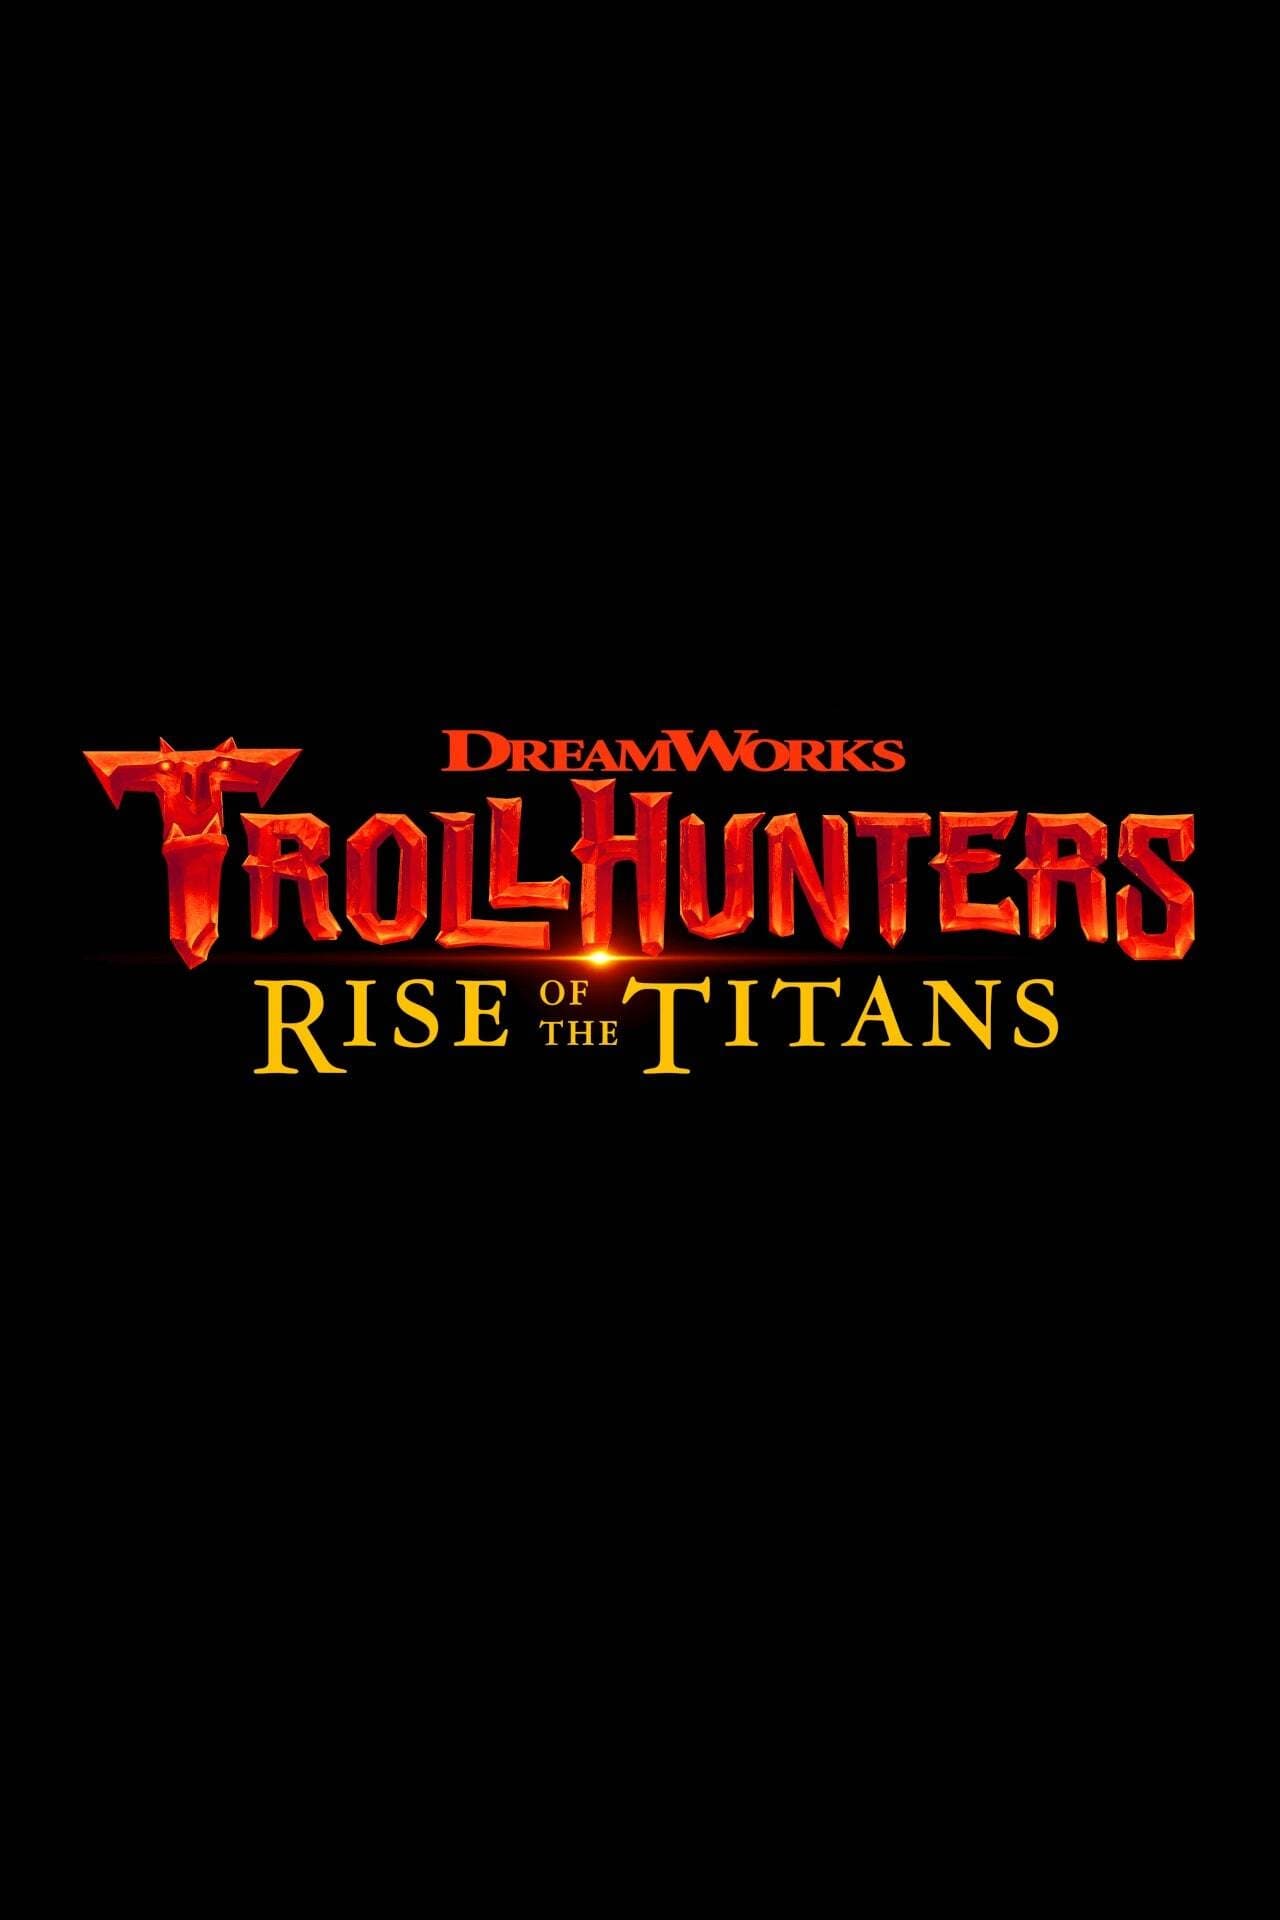 Trollhunters: Rise of the Titans (2021) FULL MOVIE ONLINE